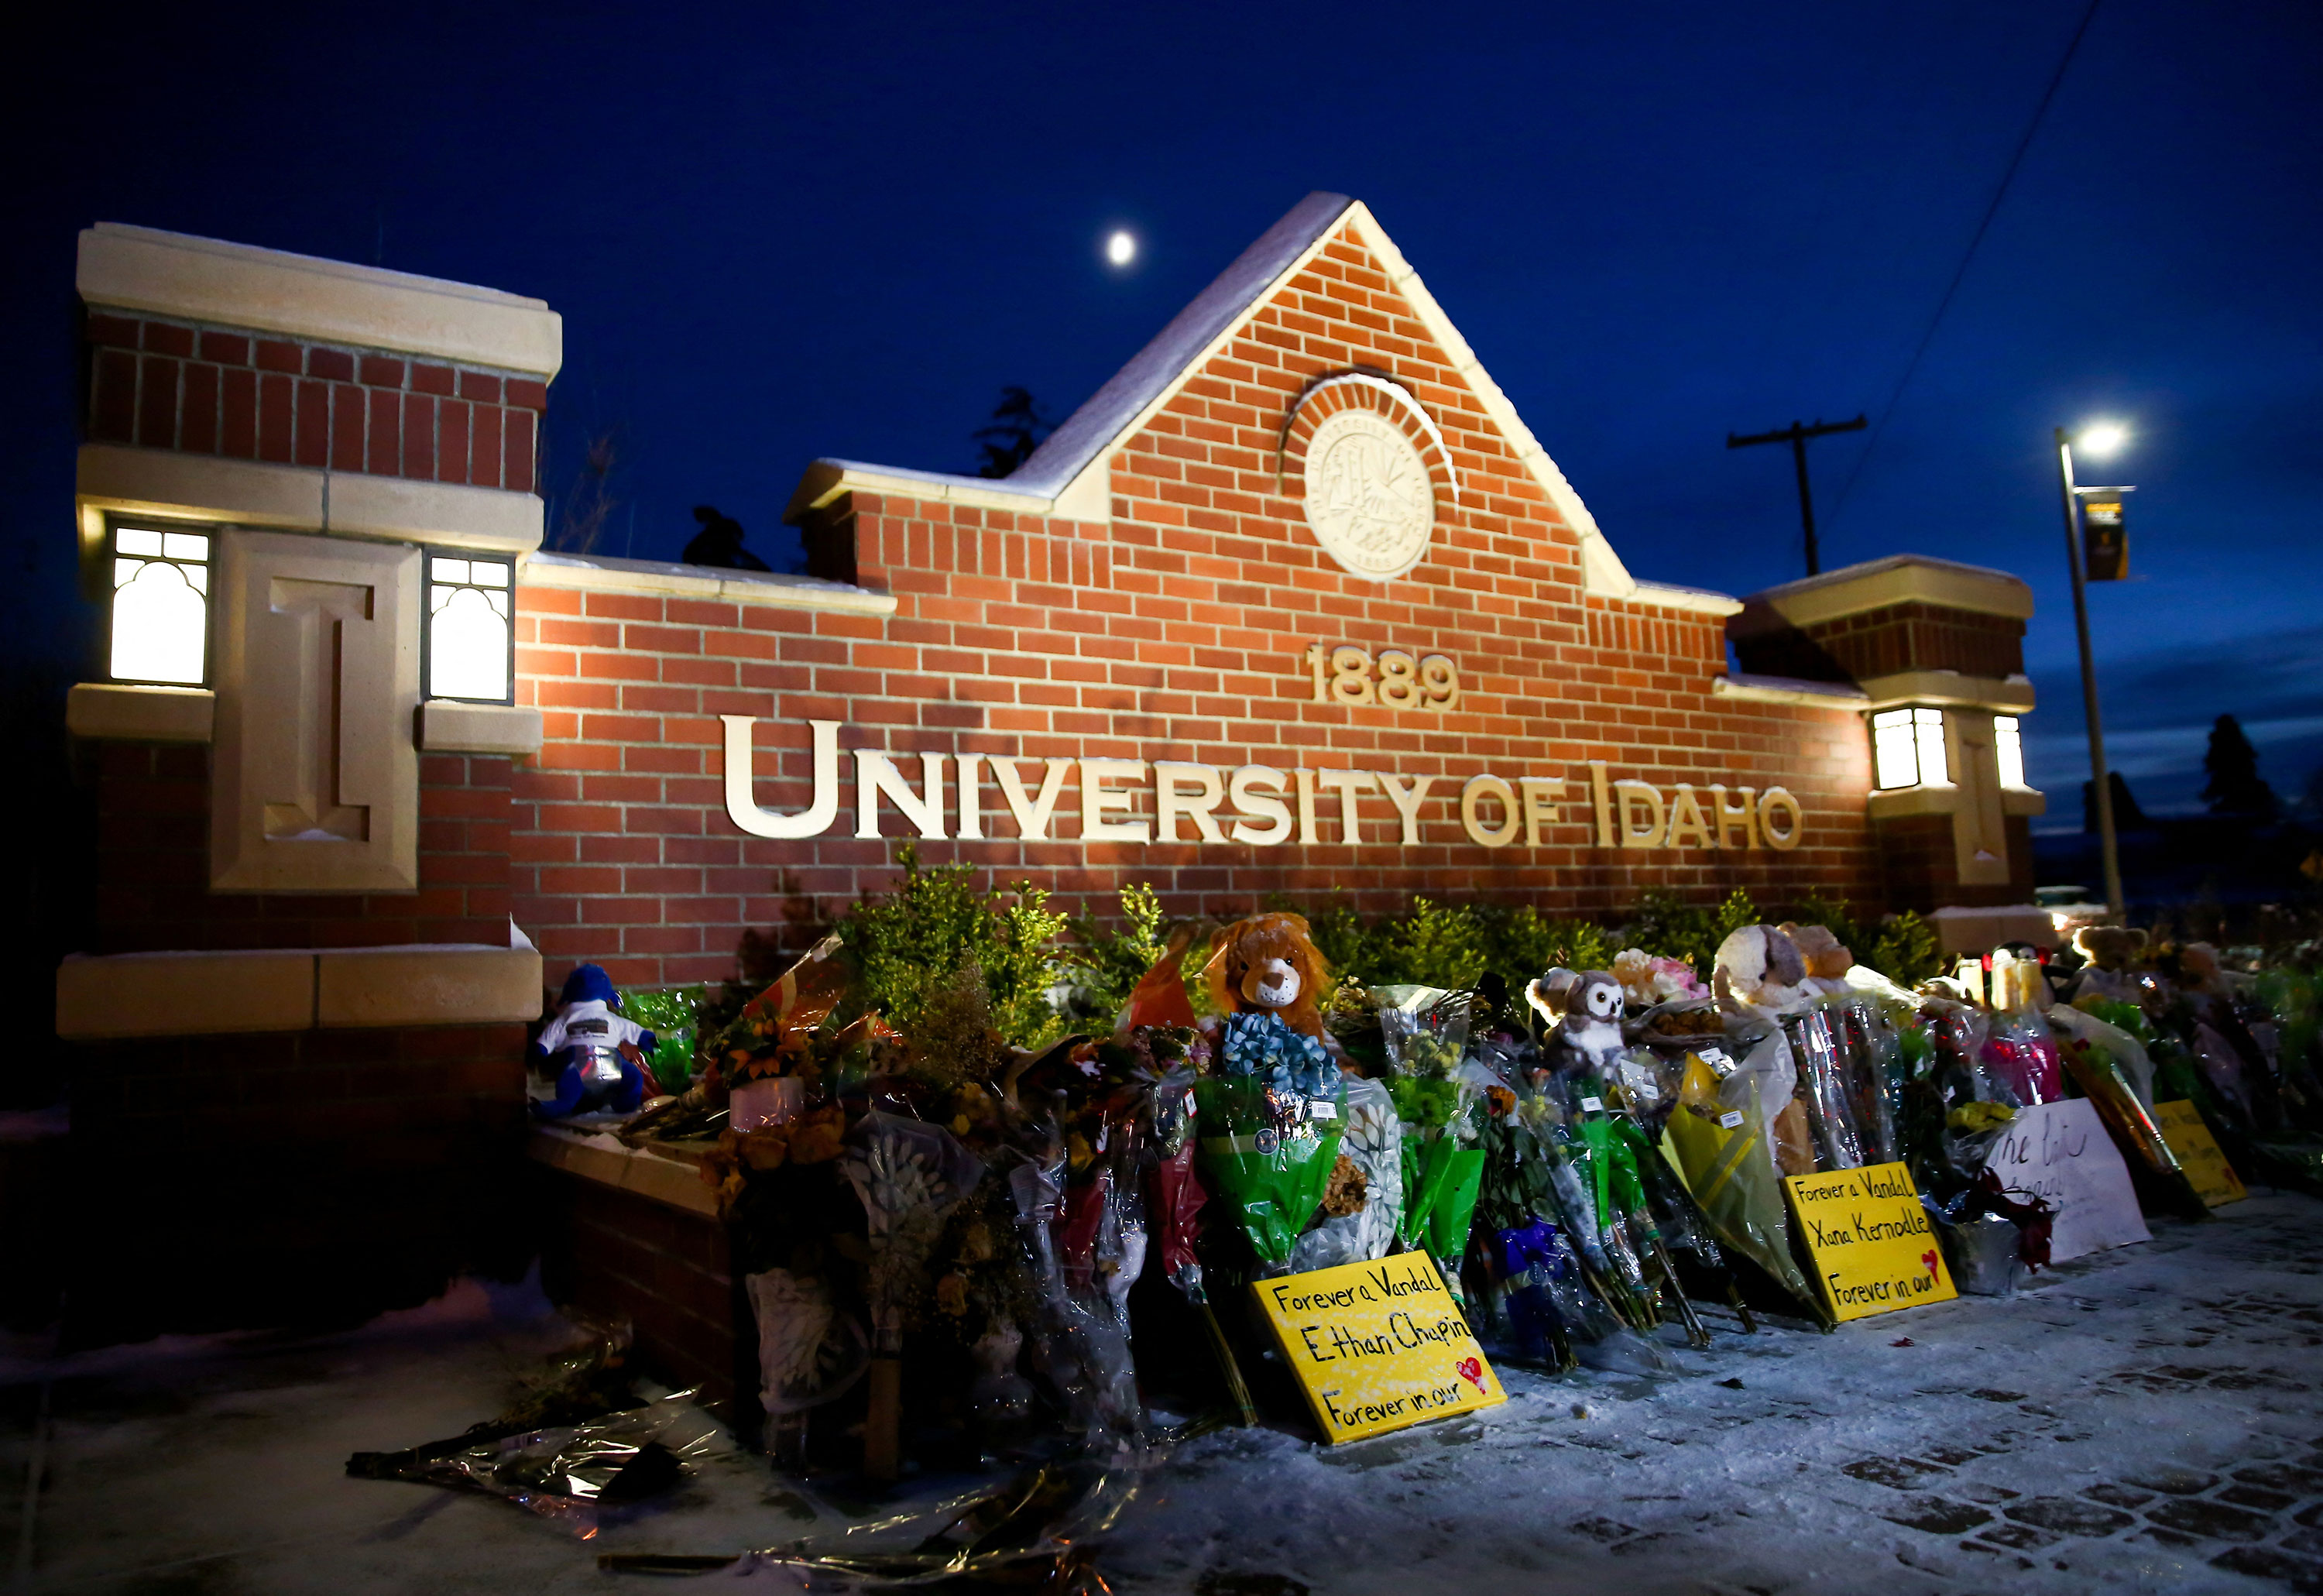 A monument is seen in front of the University of Idaho campus sign on Nov. 29 in Moscow, Idaho.